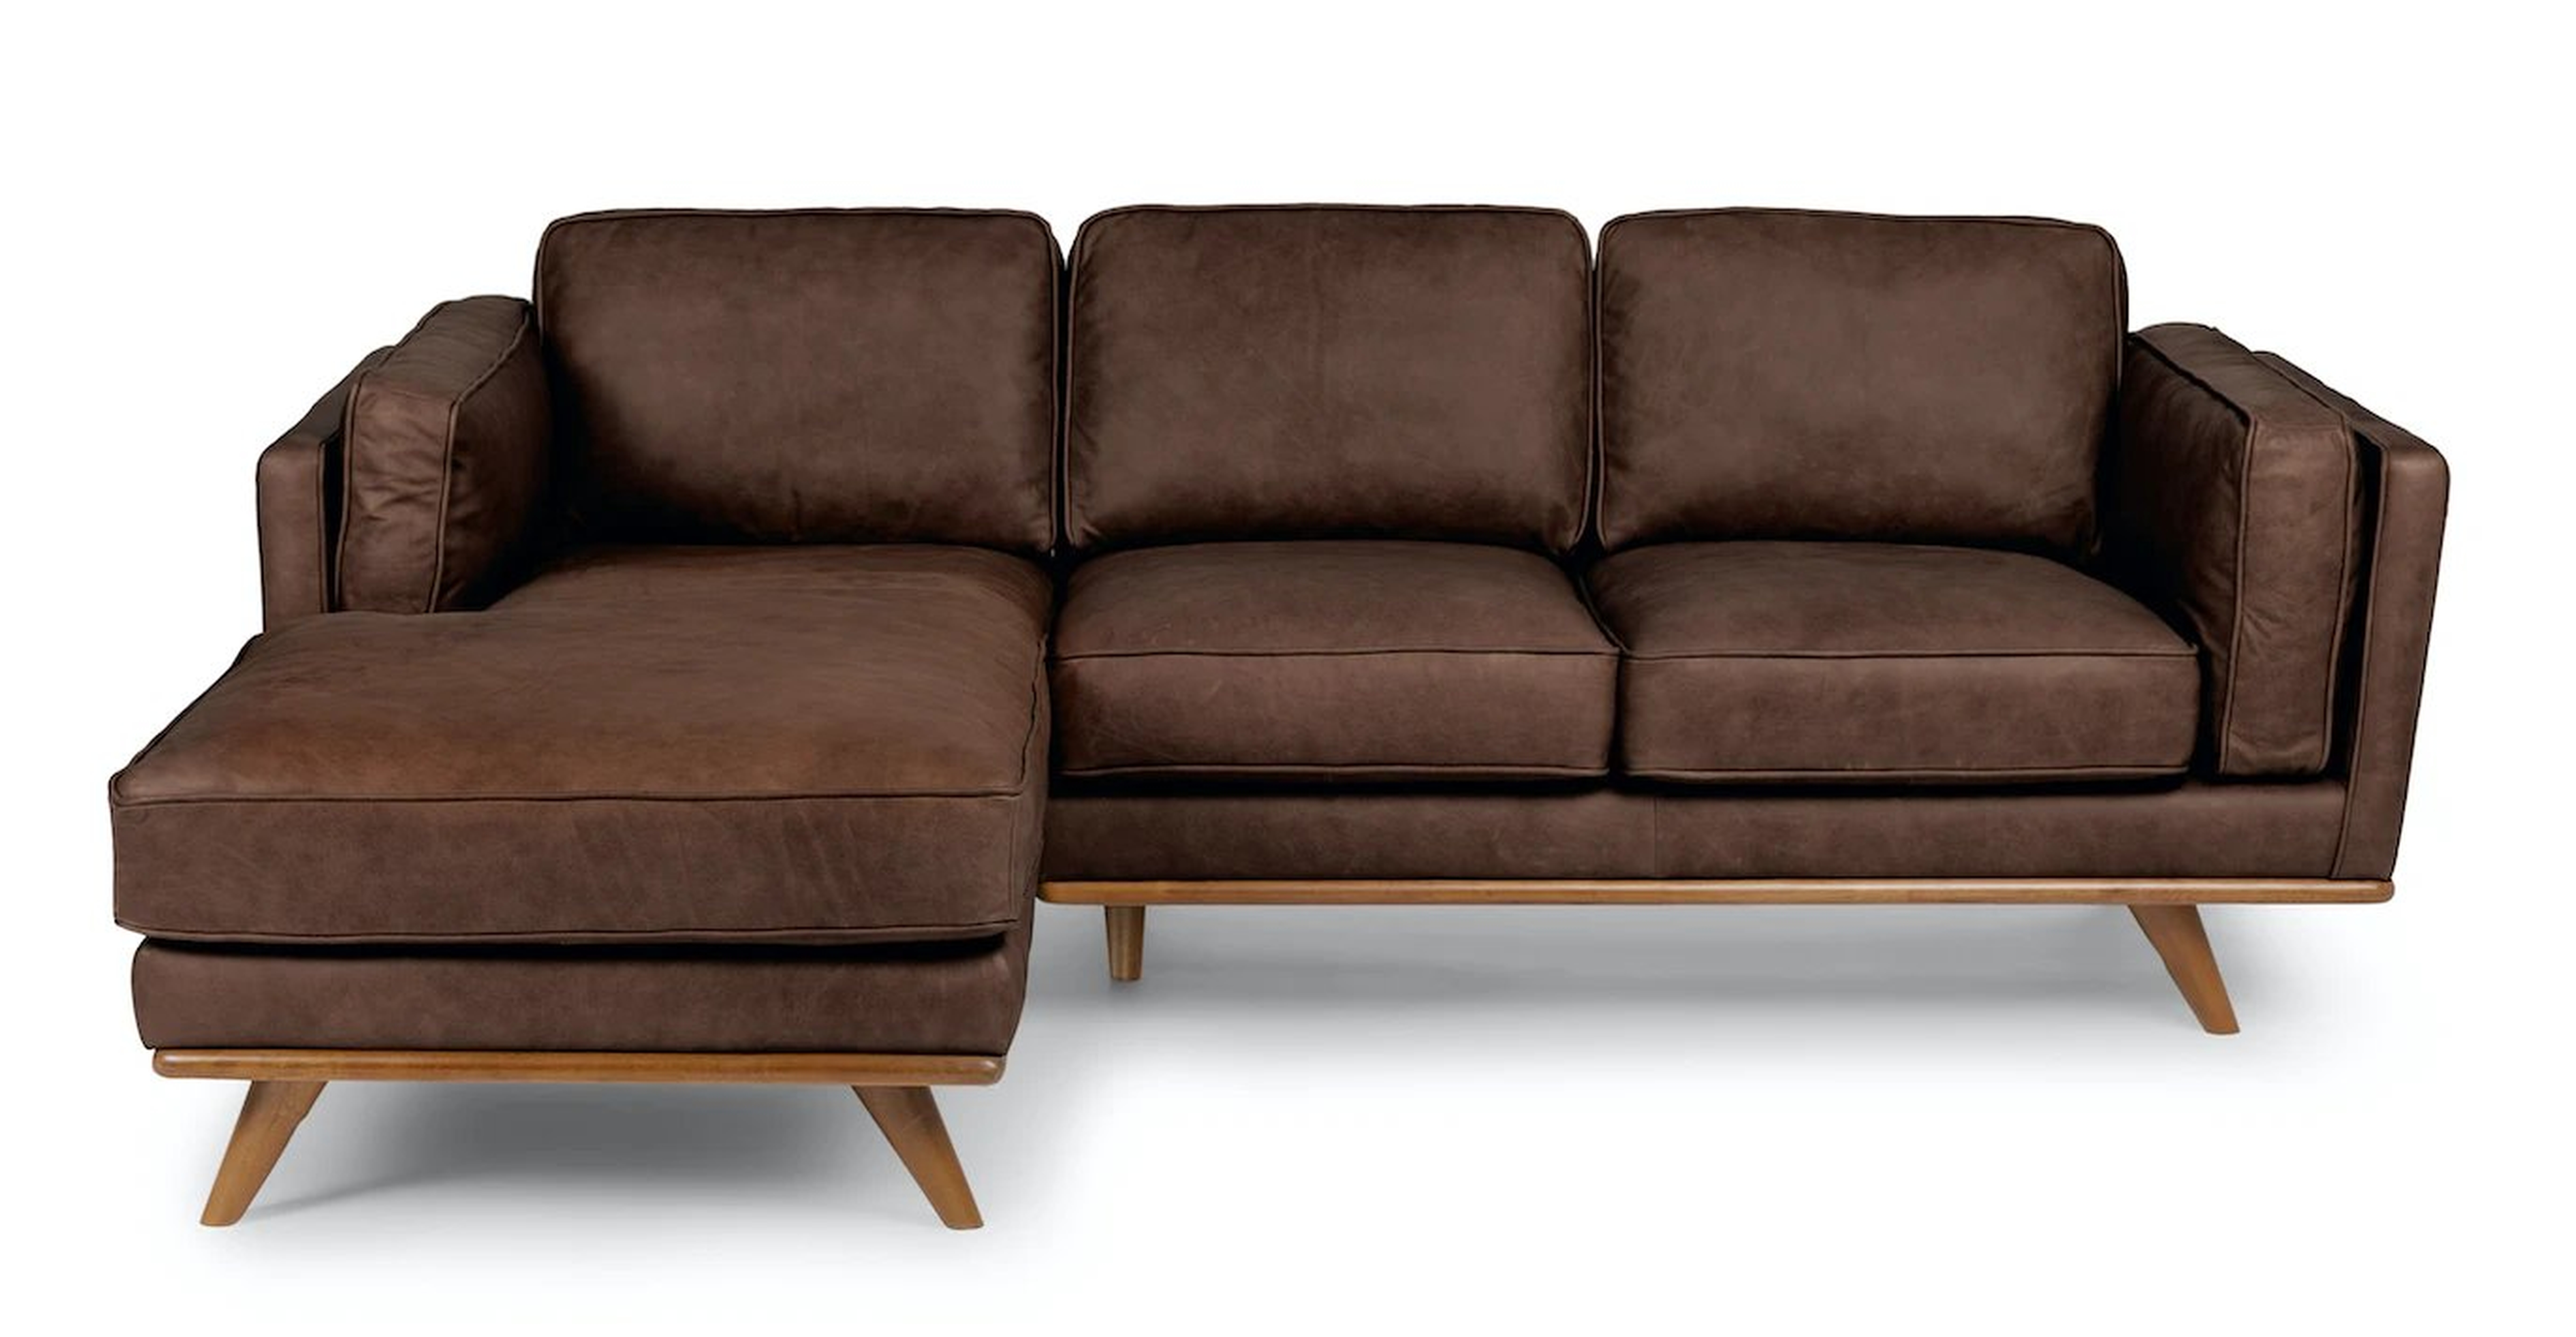 Timber Charme Chocolat Left Sectional - Article